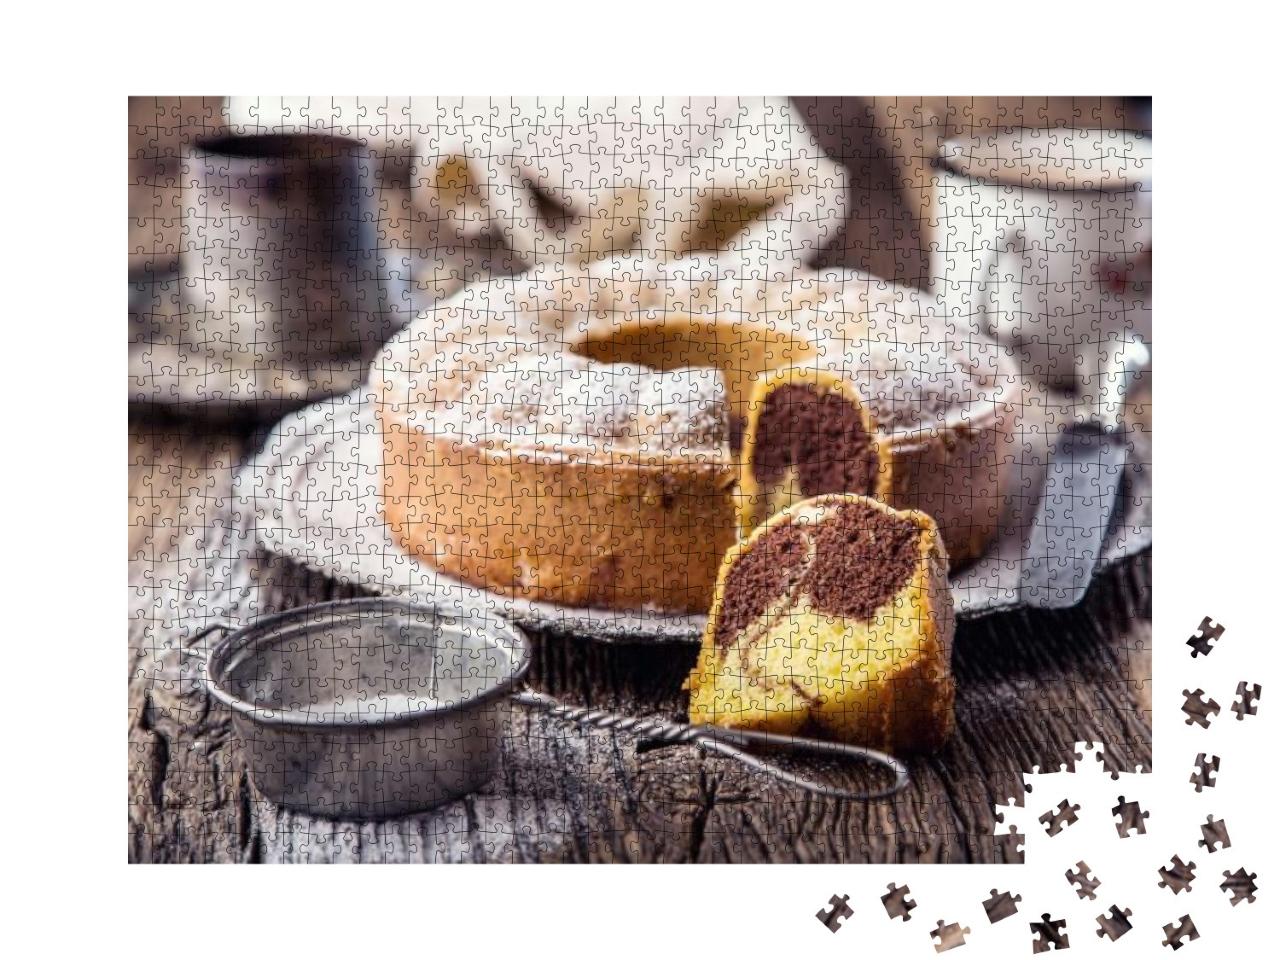 Marble Cake Cup of Coffee Powder Sugar & Kitchen Vintage... Jigsaw Puzzle with 1000 pieces